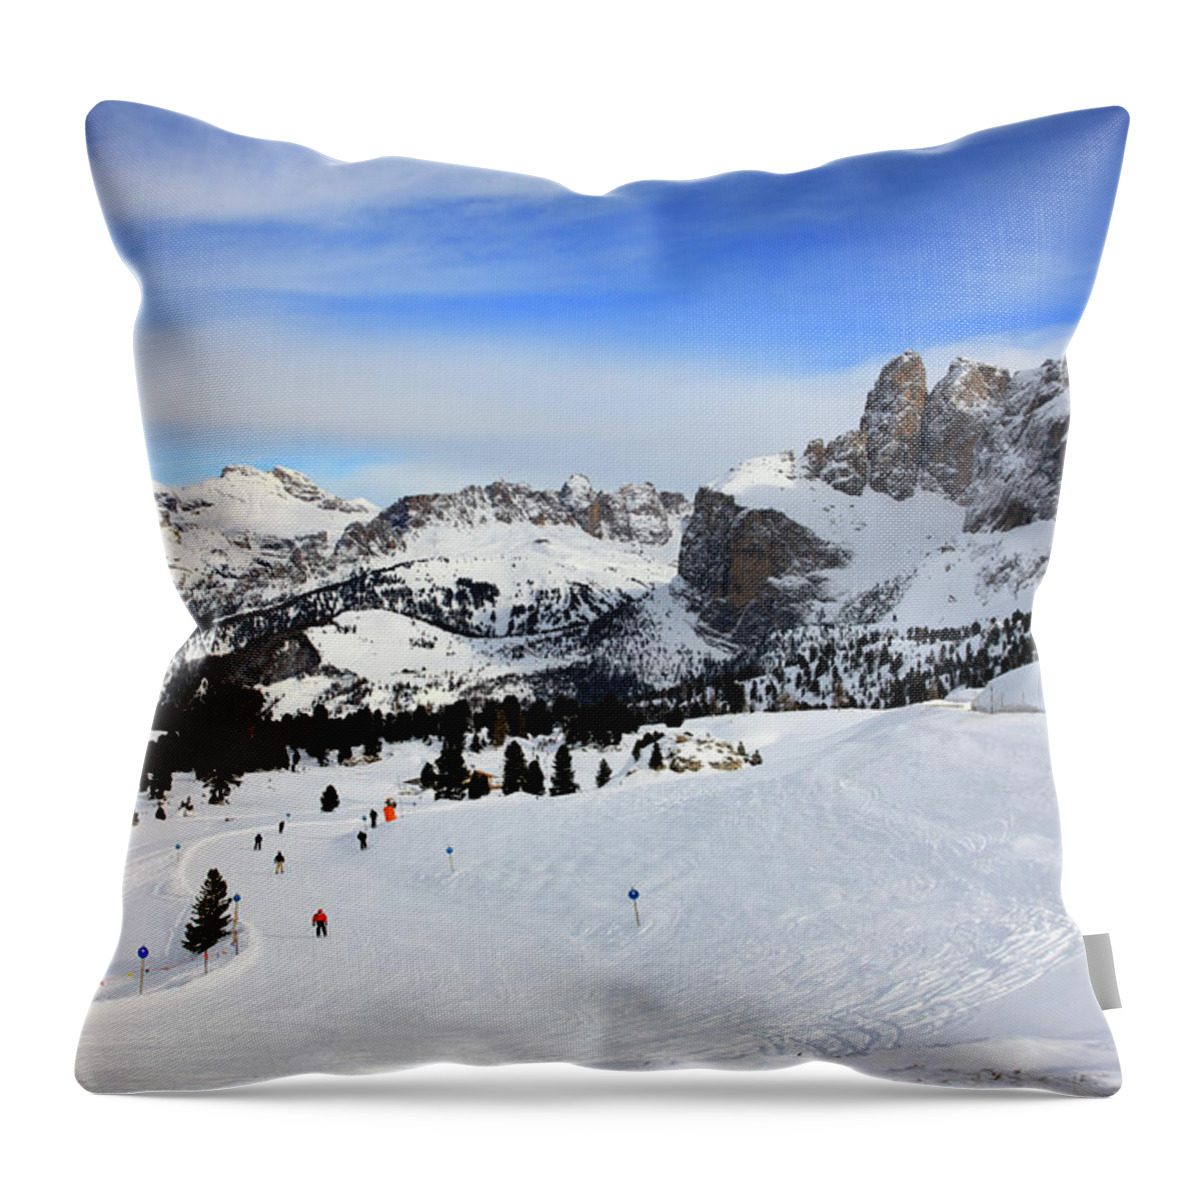 Scenics Throw Pillow featuring the photograph Skiing From The Sella Pass by Maremagnum